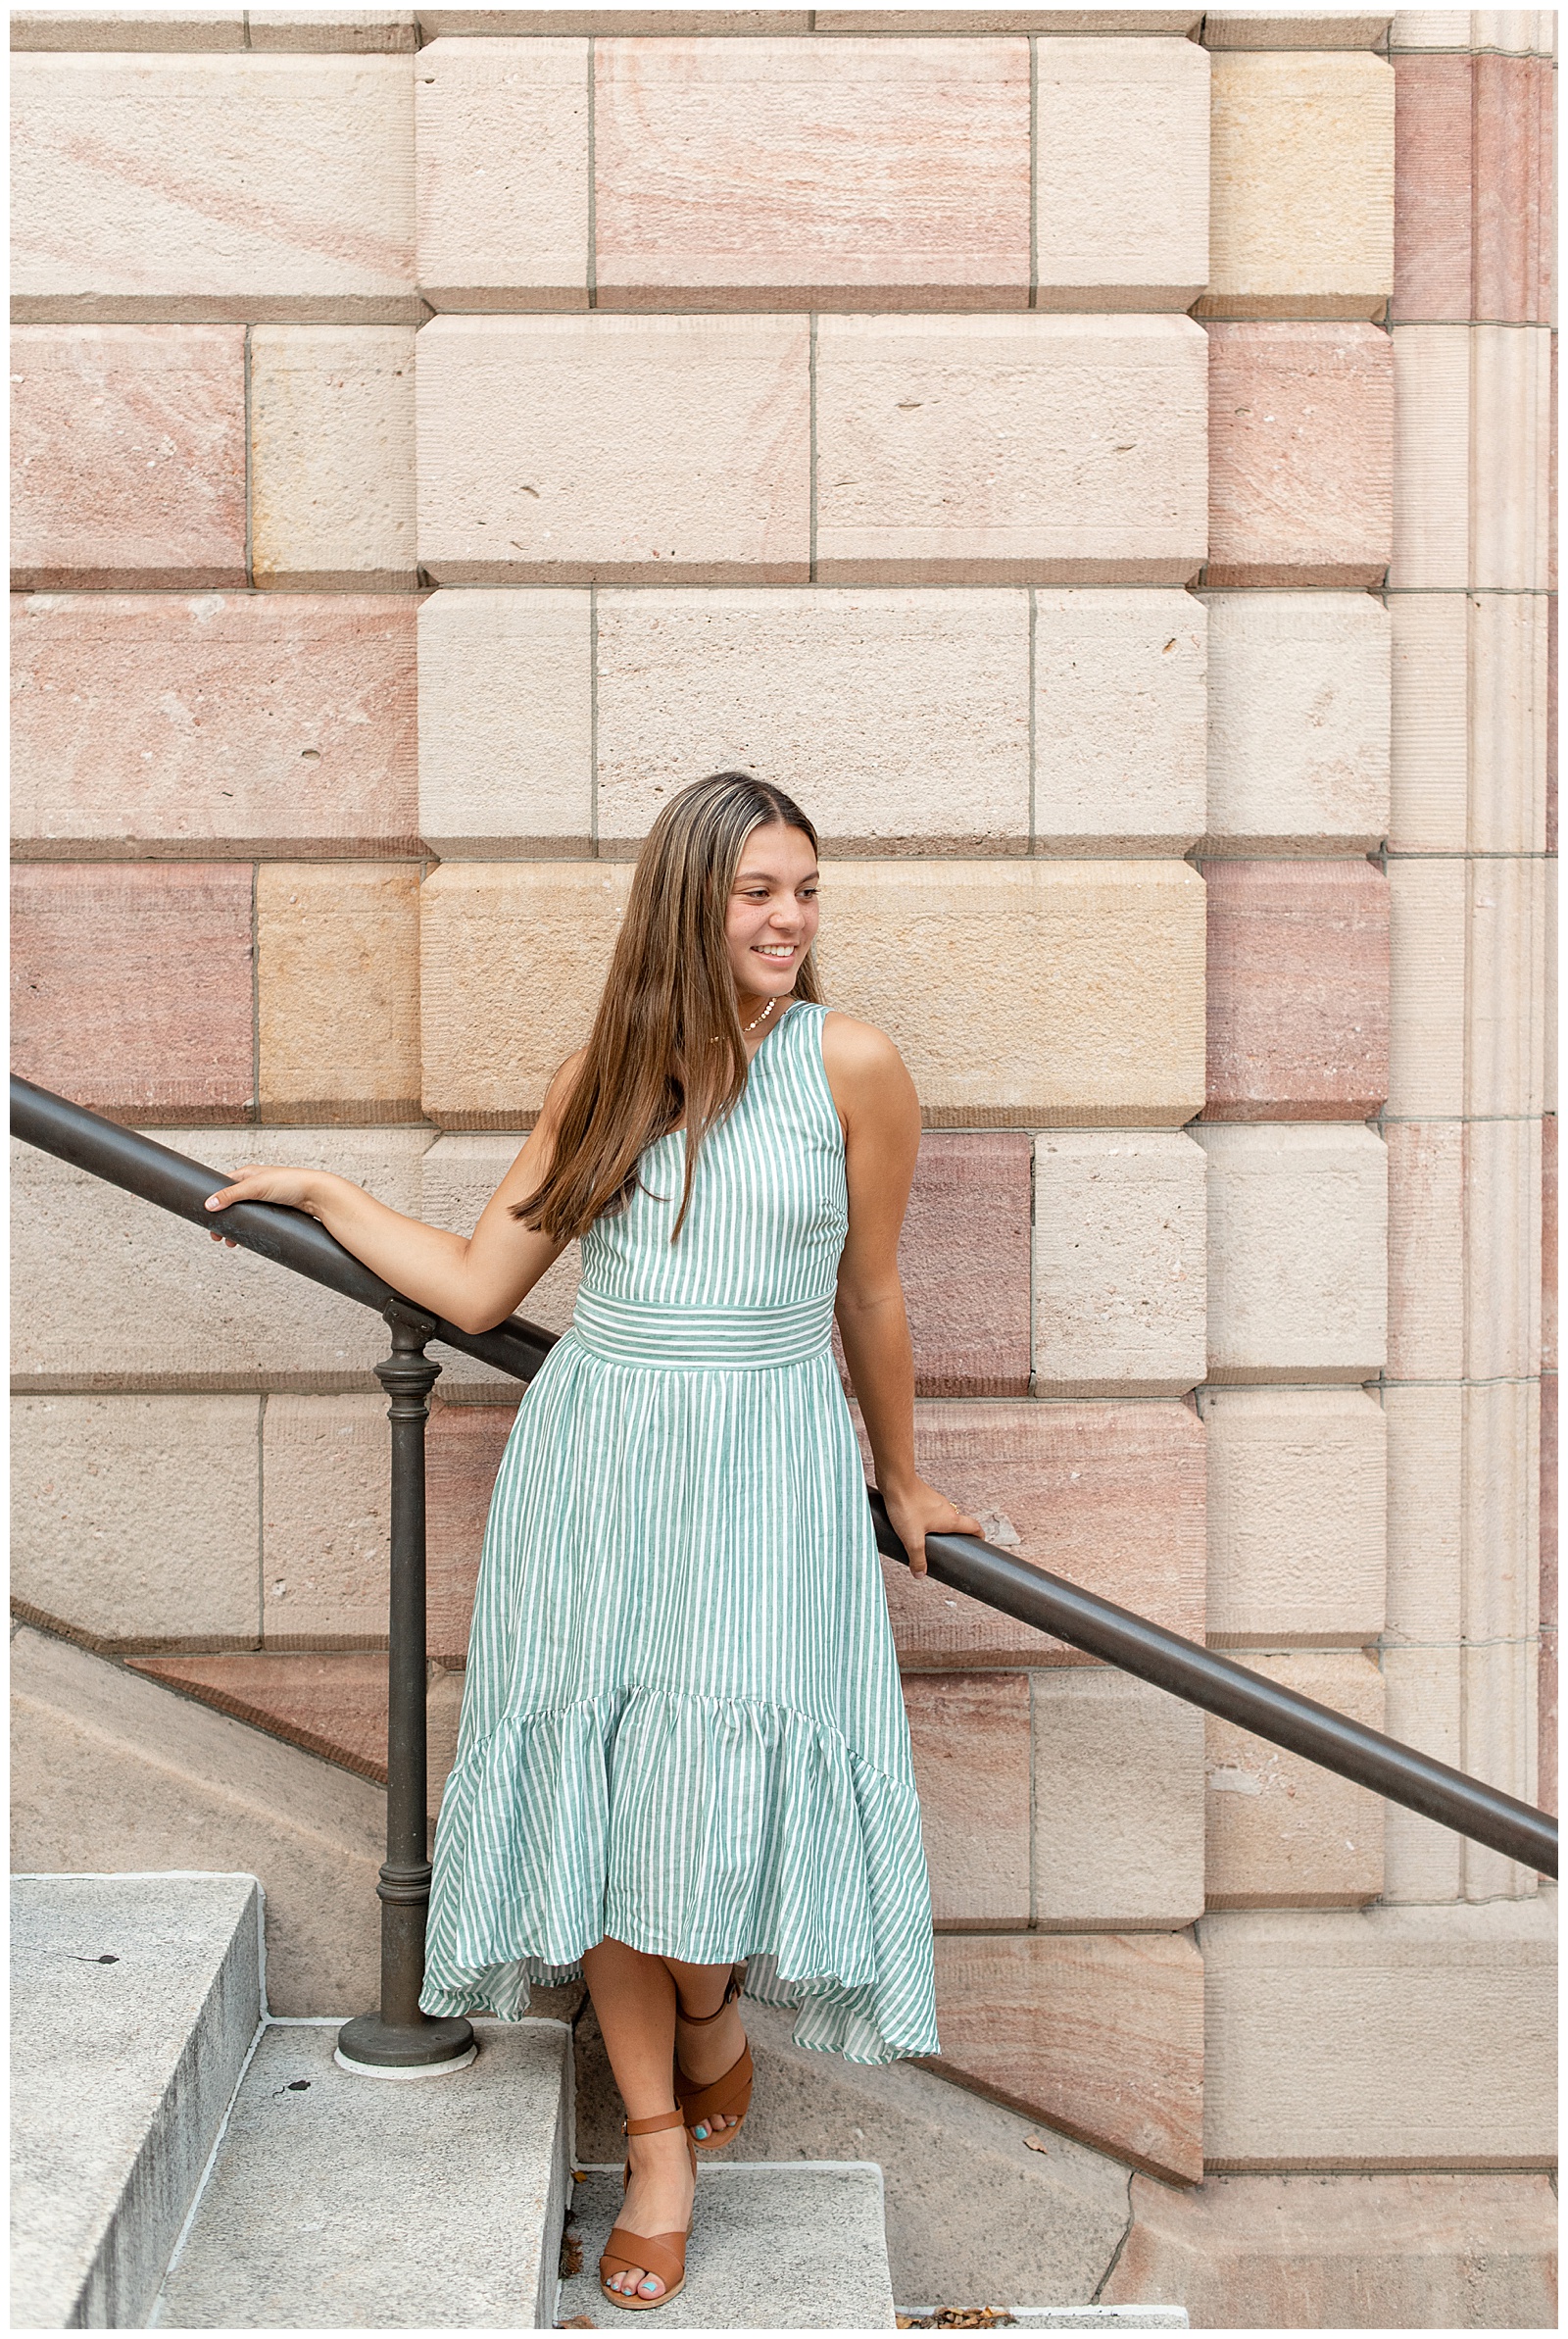 senior girl wearing blue one-strap flowy dress holding onto handrail of lancaster county courthouse and looking to her left smiling in downtown lancaster